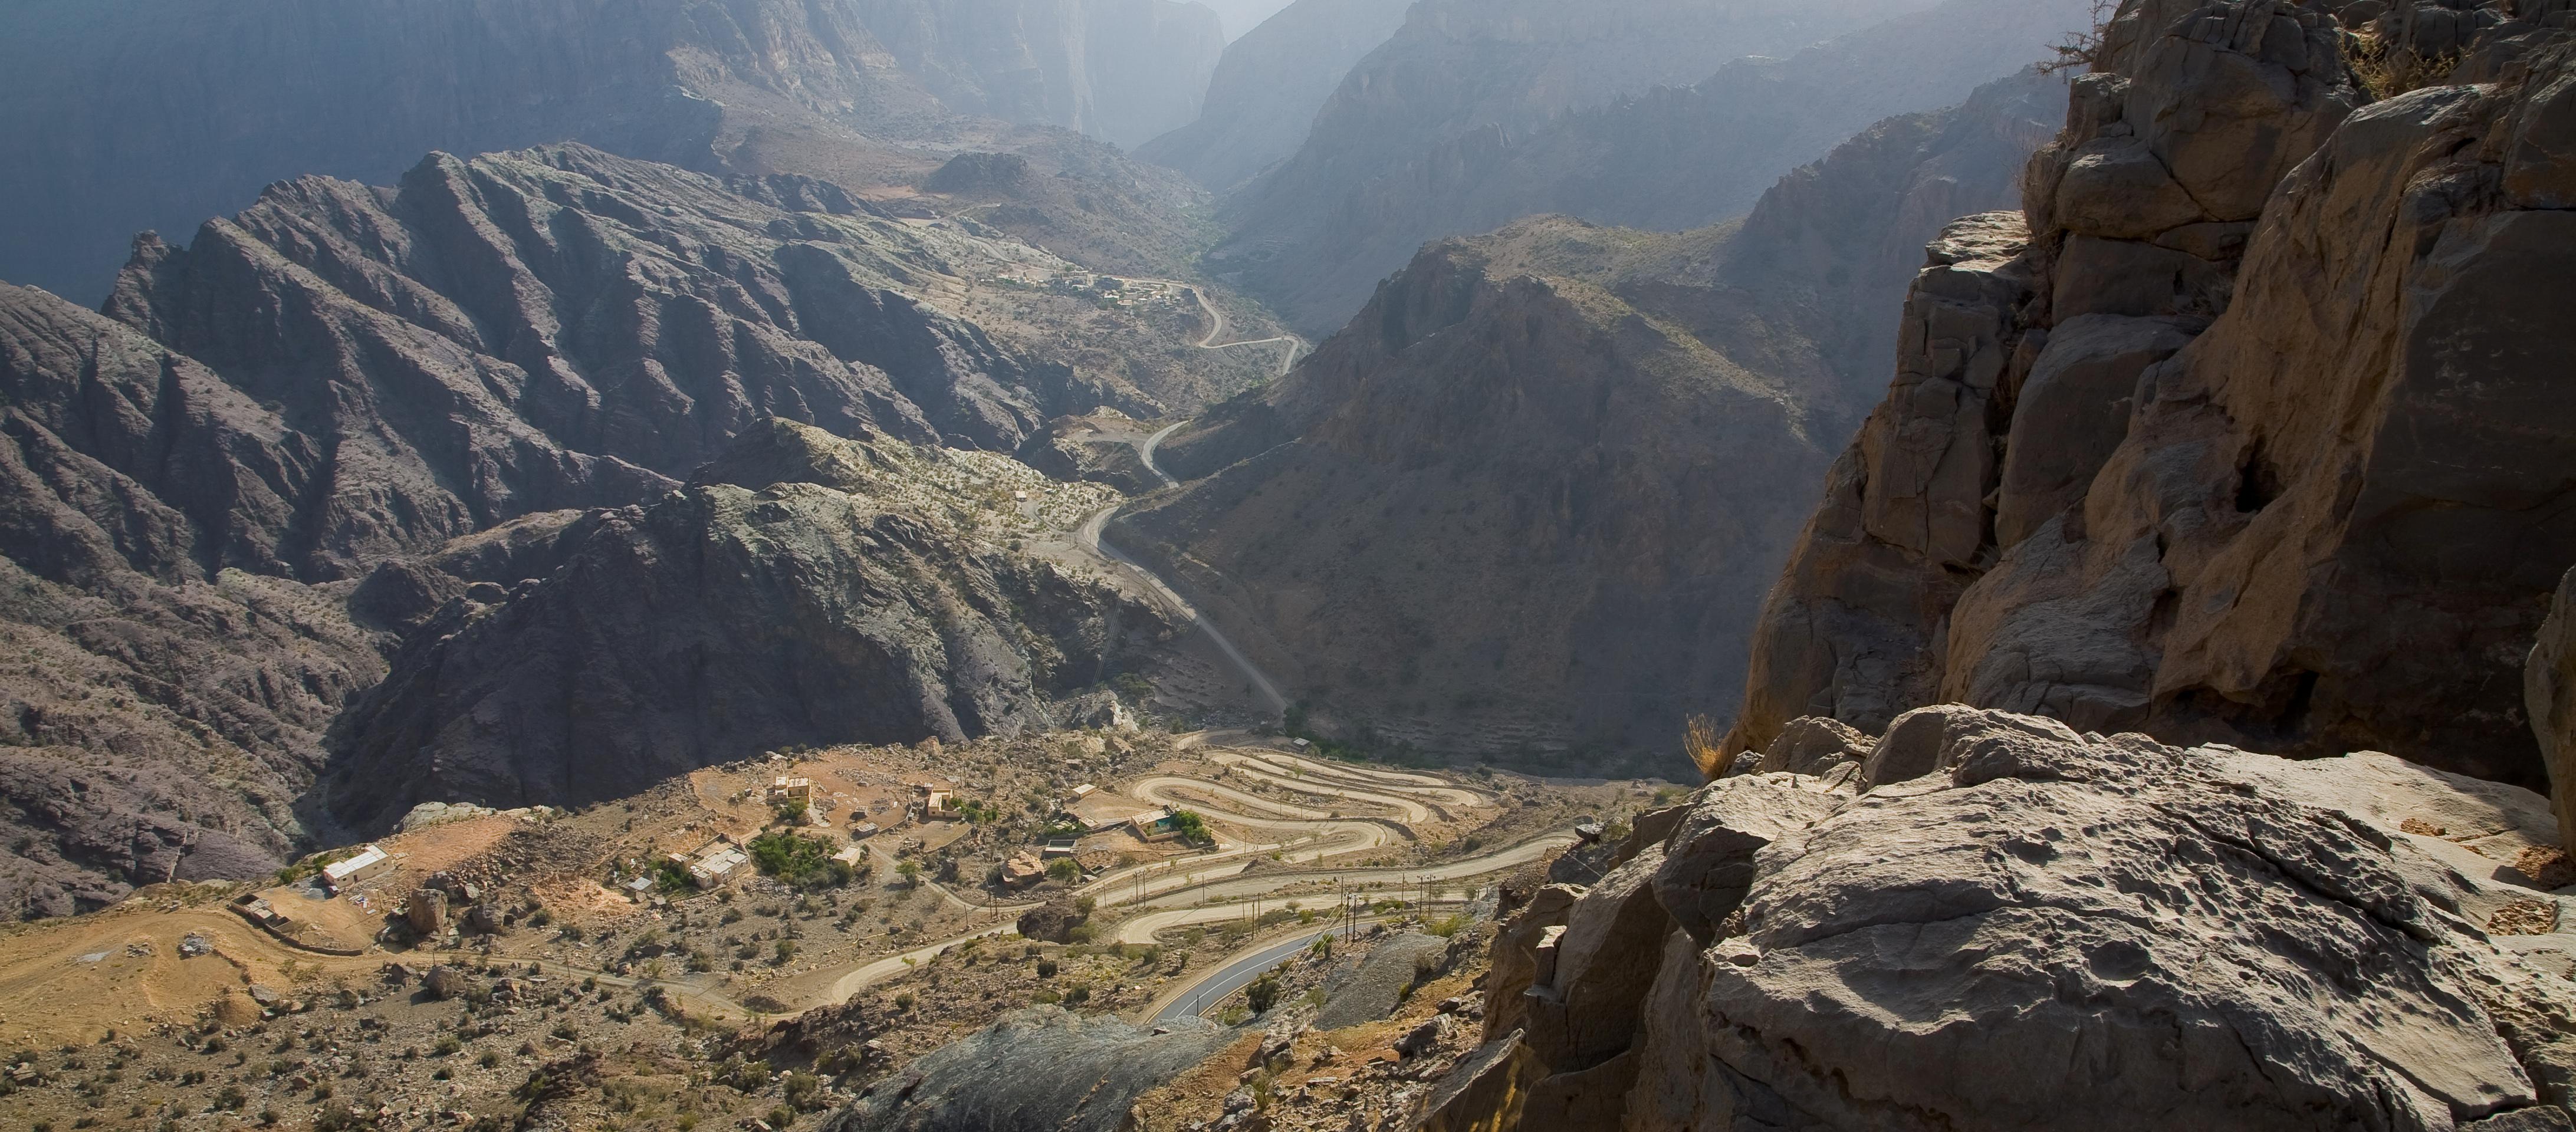 Private Excursion to Jebel Akhdar, the "Green Mountain" – Leaving from Muscat